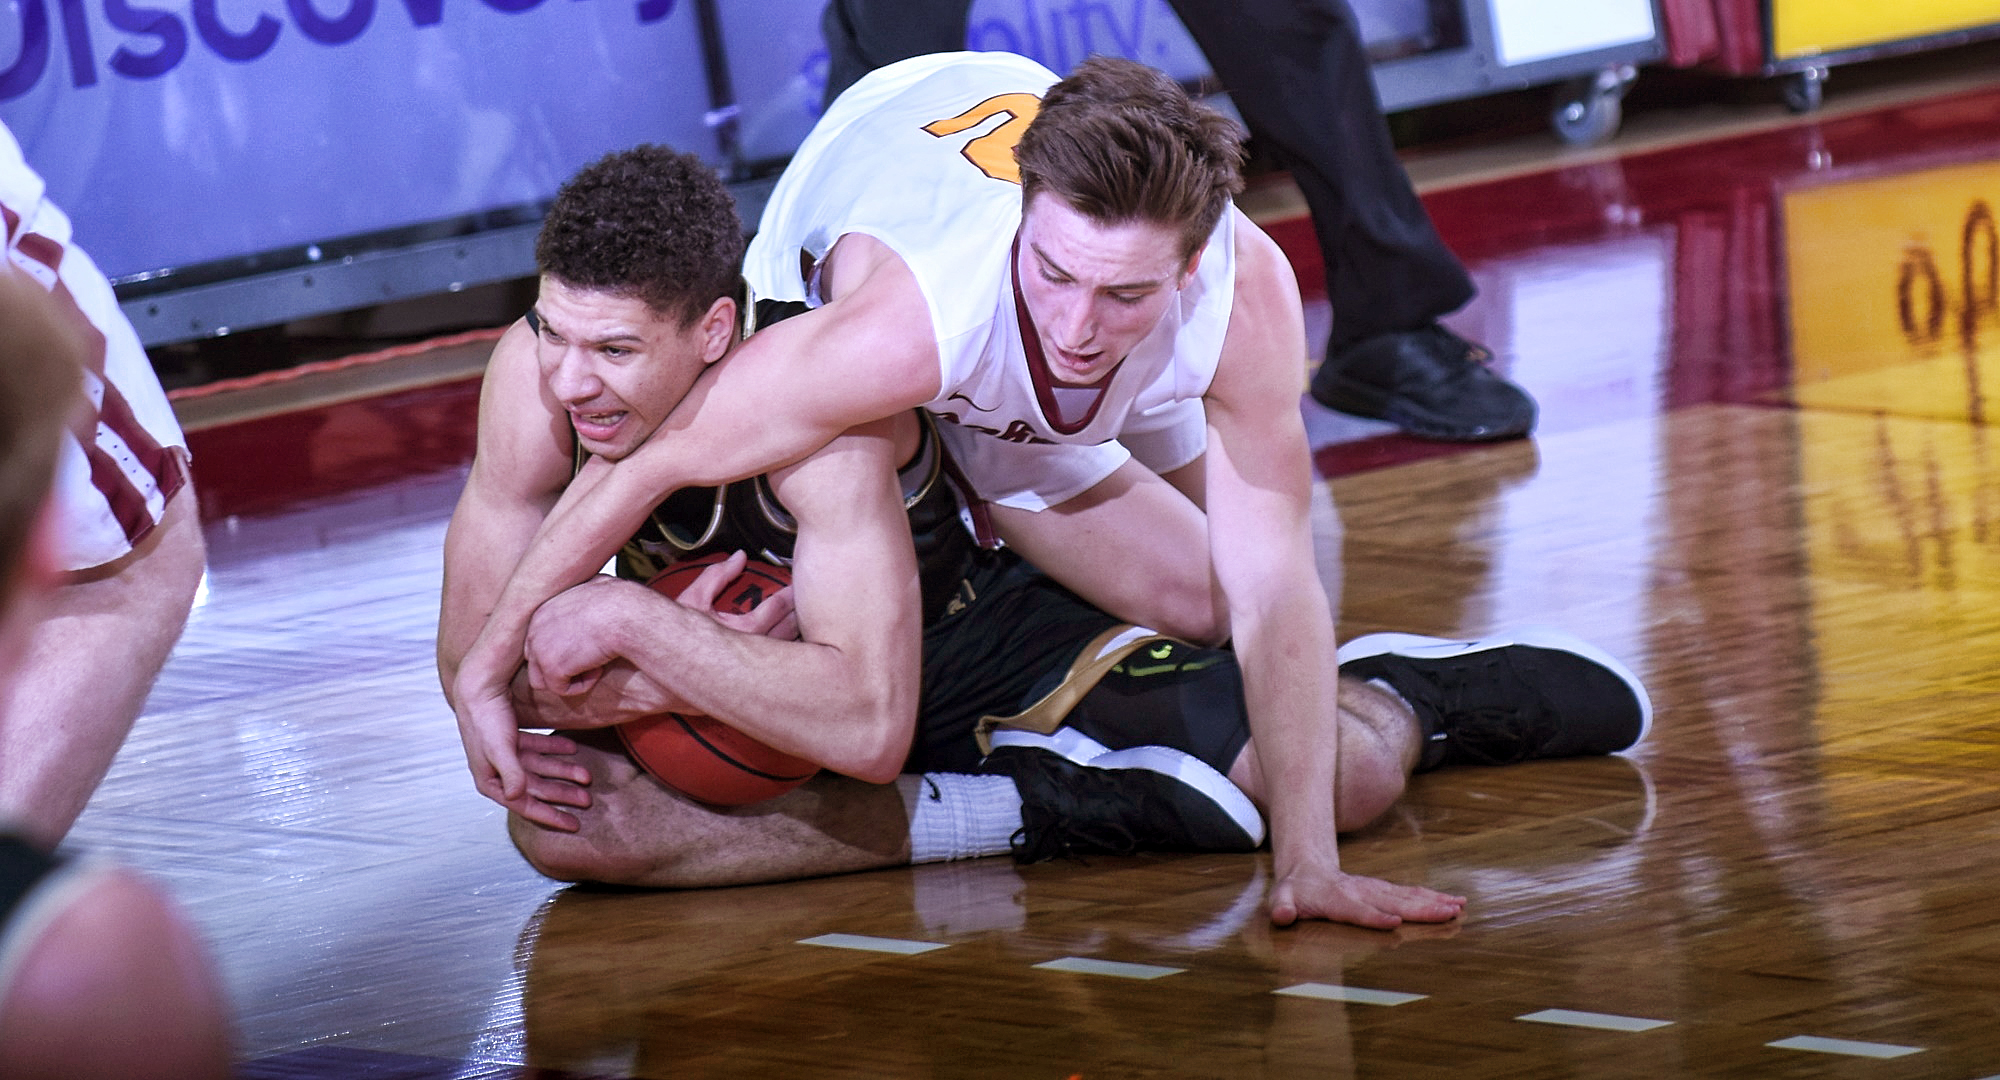 Sophomore Bryden Urie dives on the floor for a loose ball during the second half of the Cobbers' game with St. Olaf.